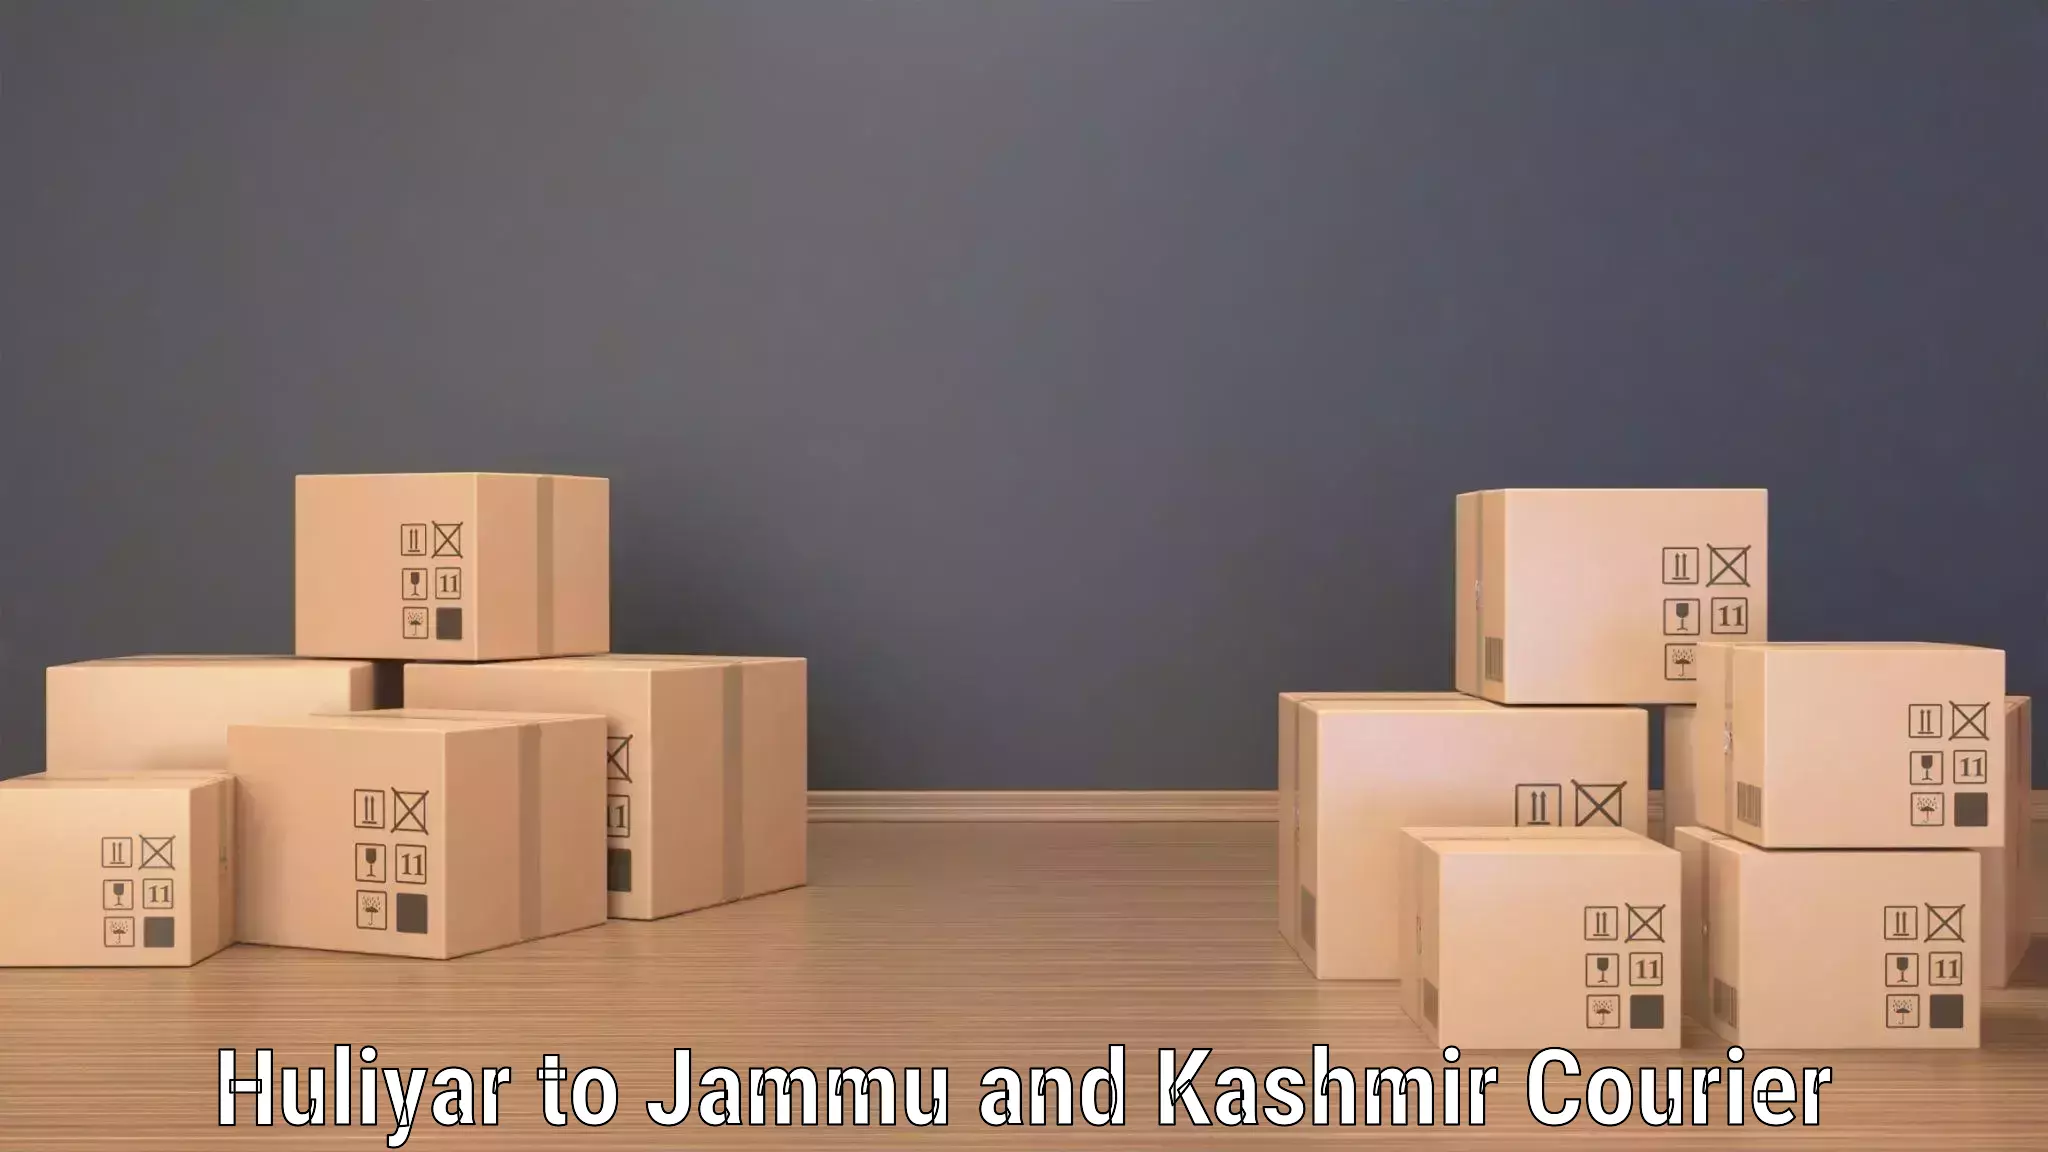 Multi-national courier services Huliyar to Baramulla